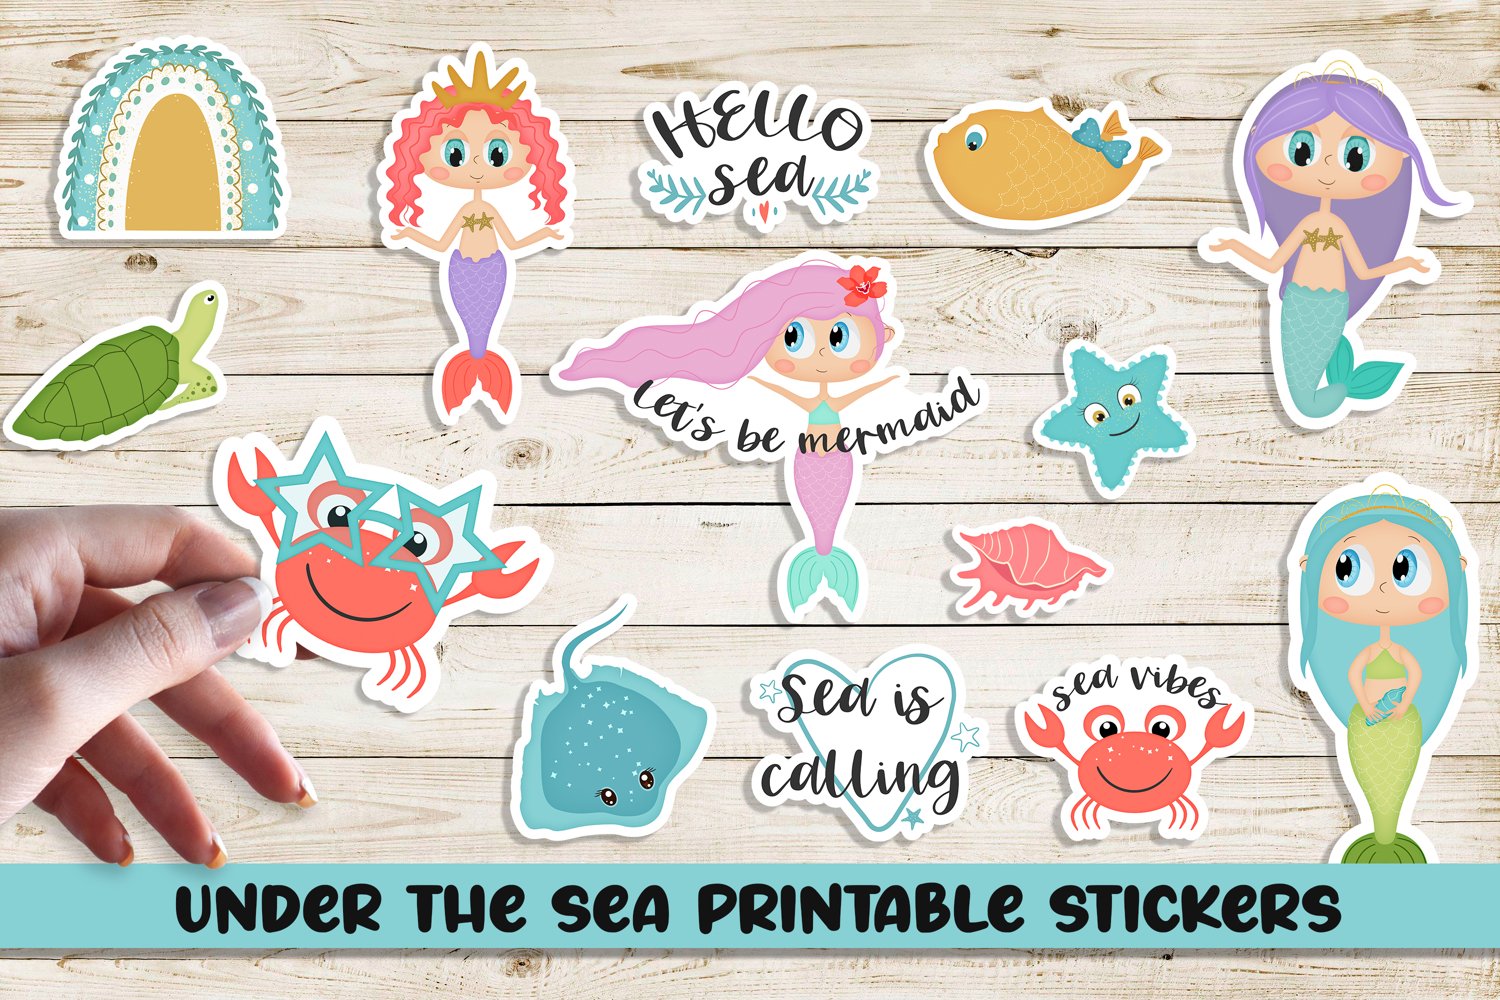 Under the sea printable stickers.